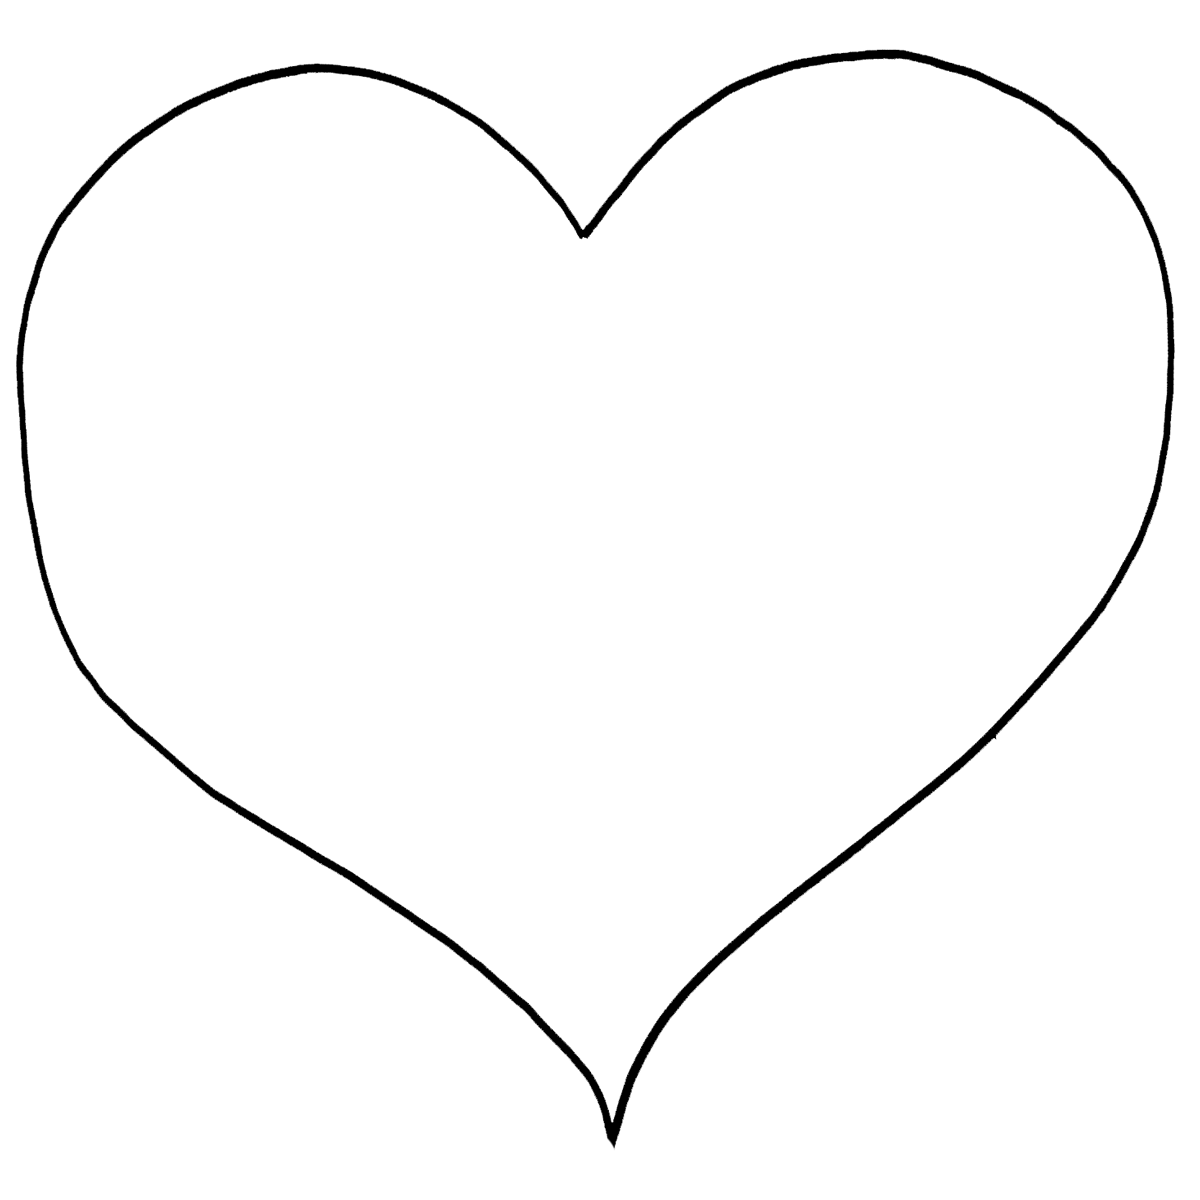 heart printable coloring pages heart coloring page download free heart coloring page heart printable pages coloring 